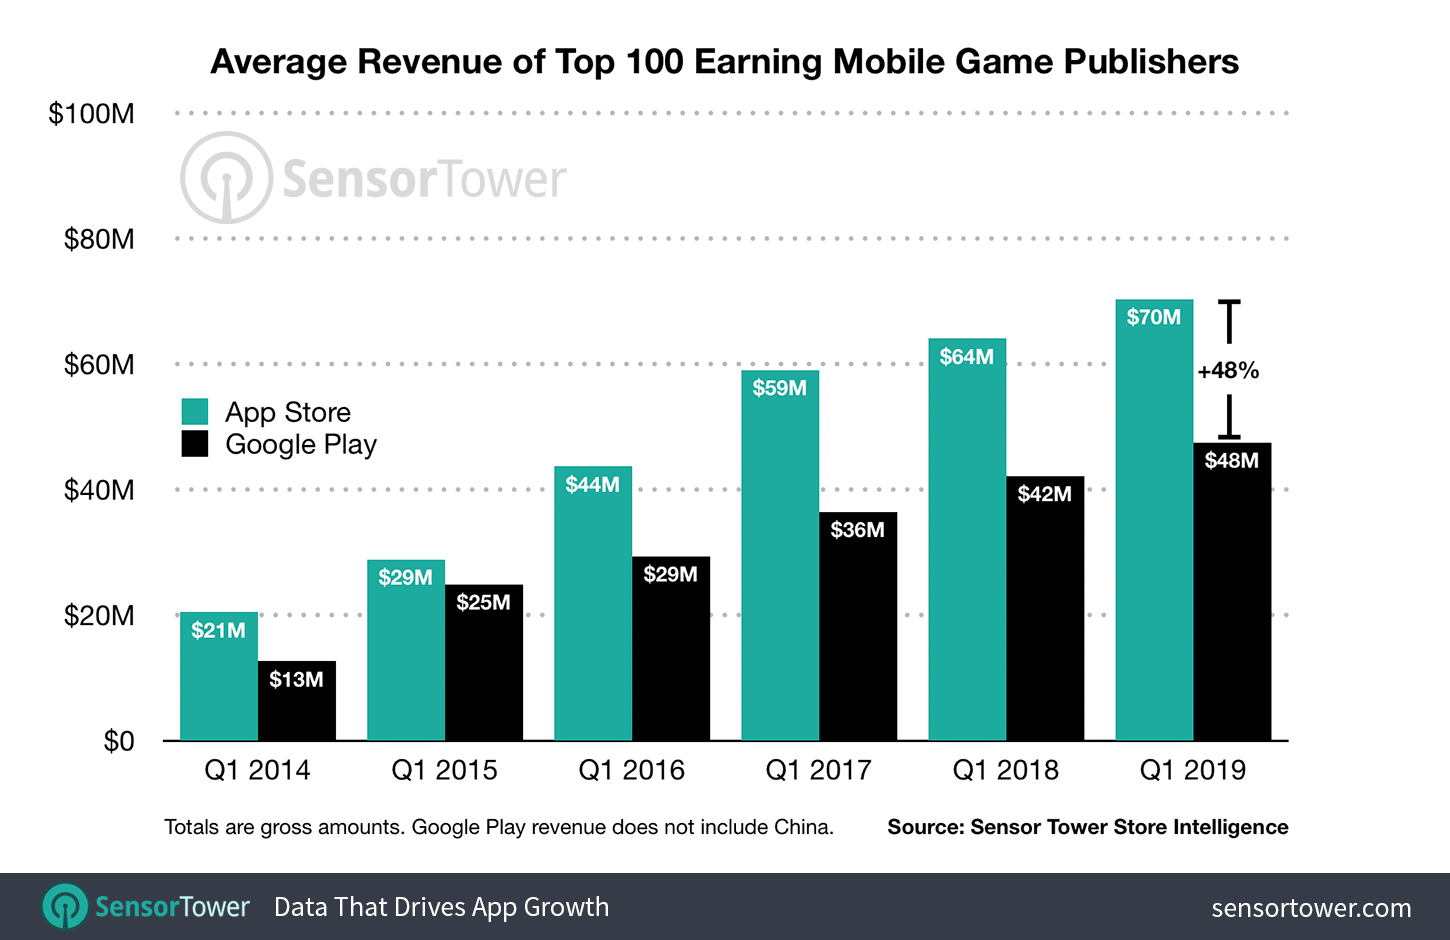 Revenue from top 100 gaming apps on iOS and Android - The Apple App Store continues to outperform the Google Play Store